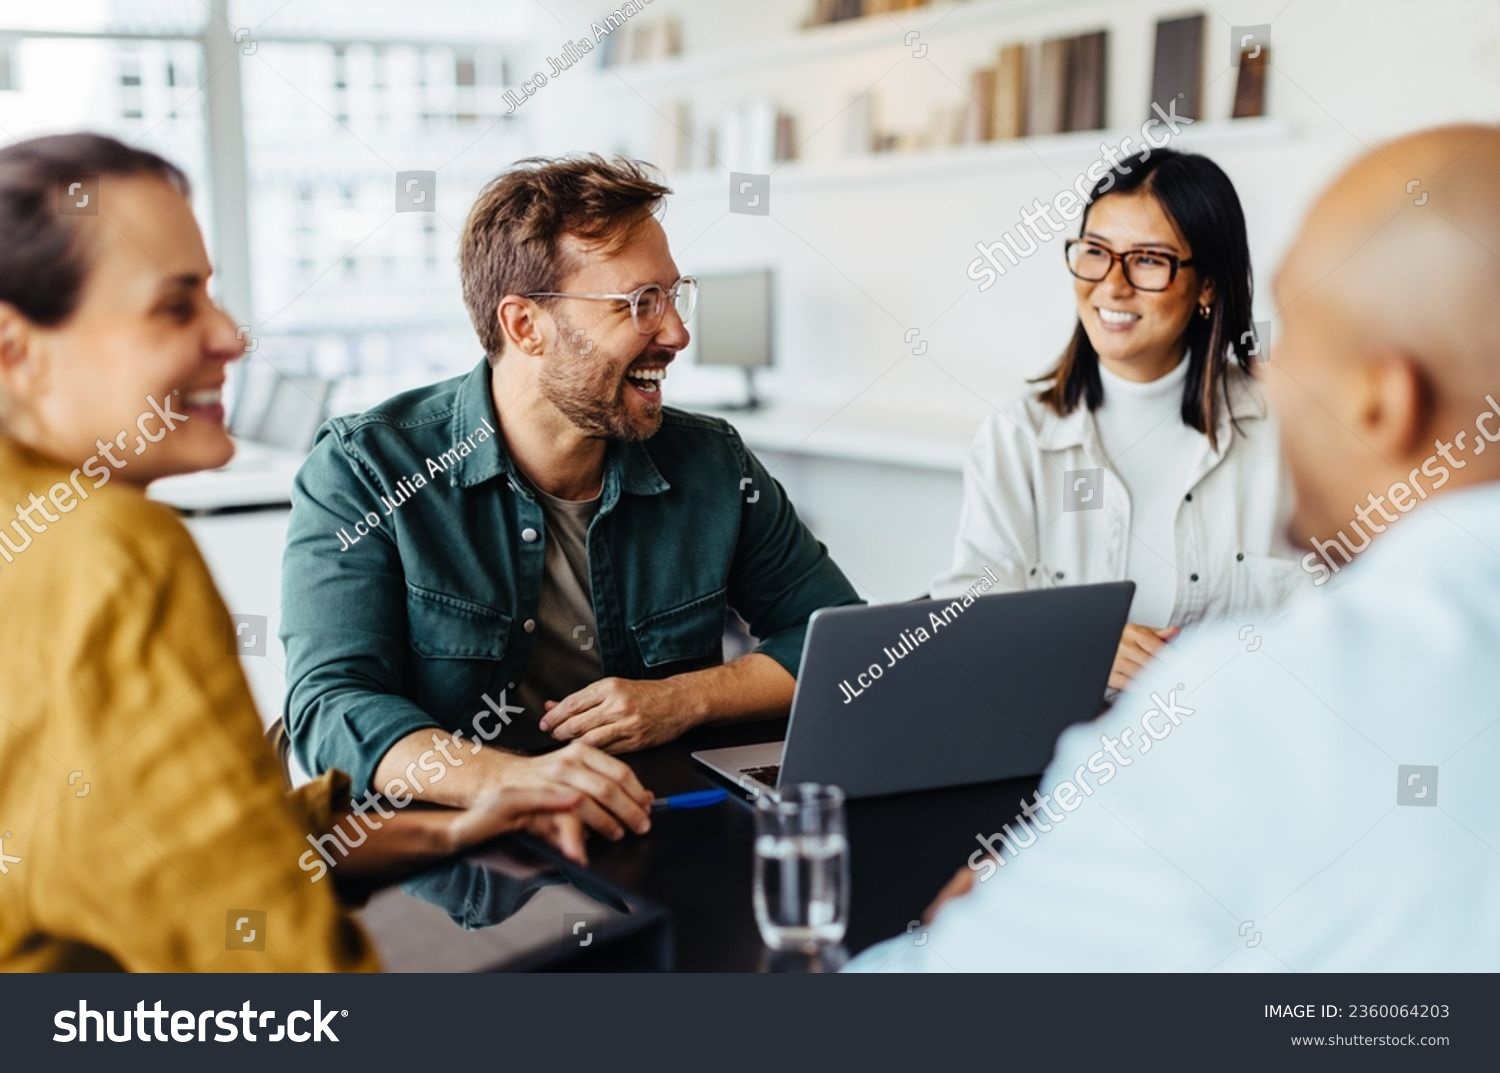 Diverse business people having a team meeting in an office. Group of happy business professionals sitting around a table and having a discussion. #2360064203